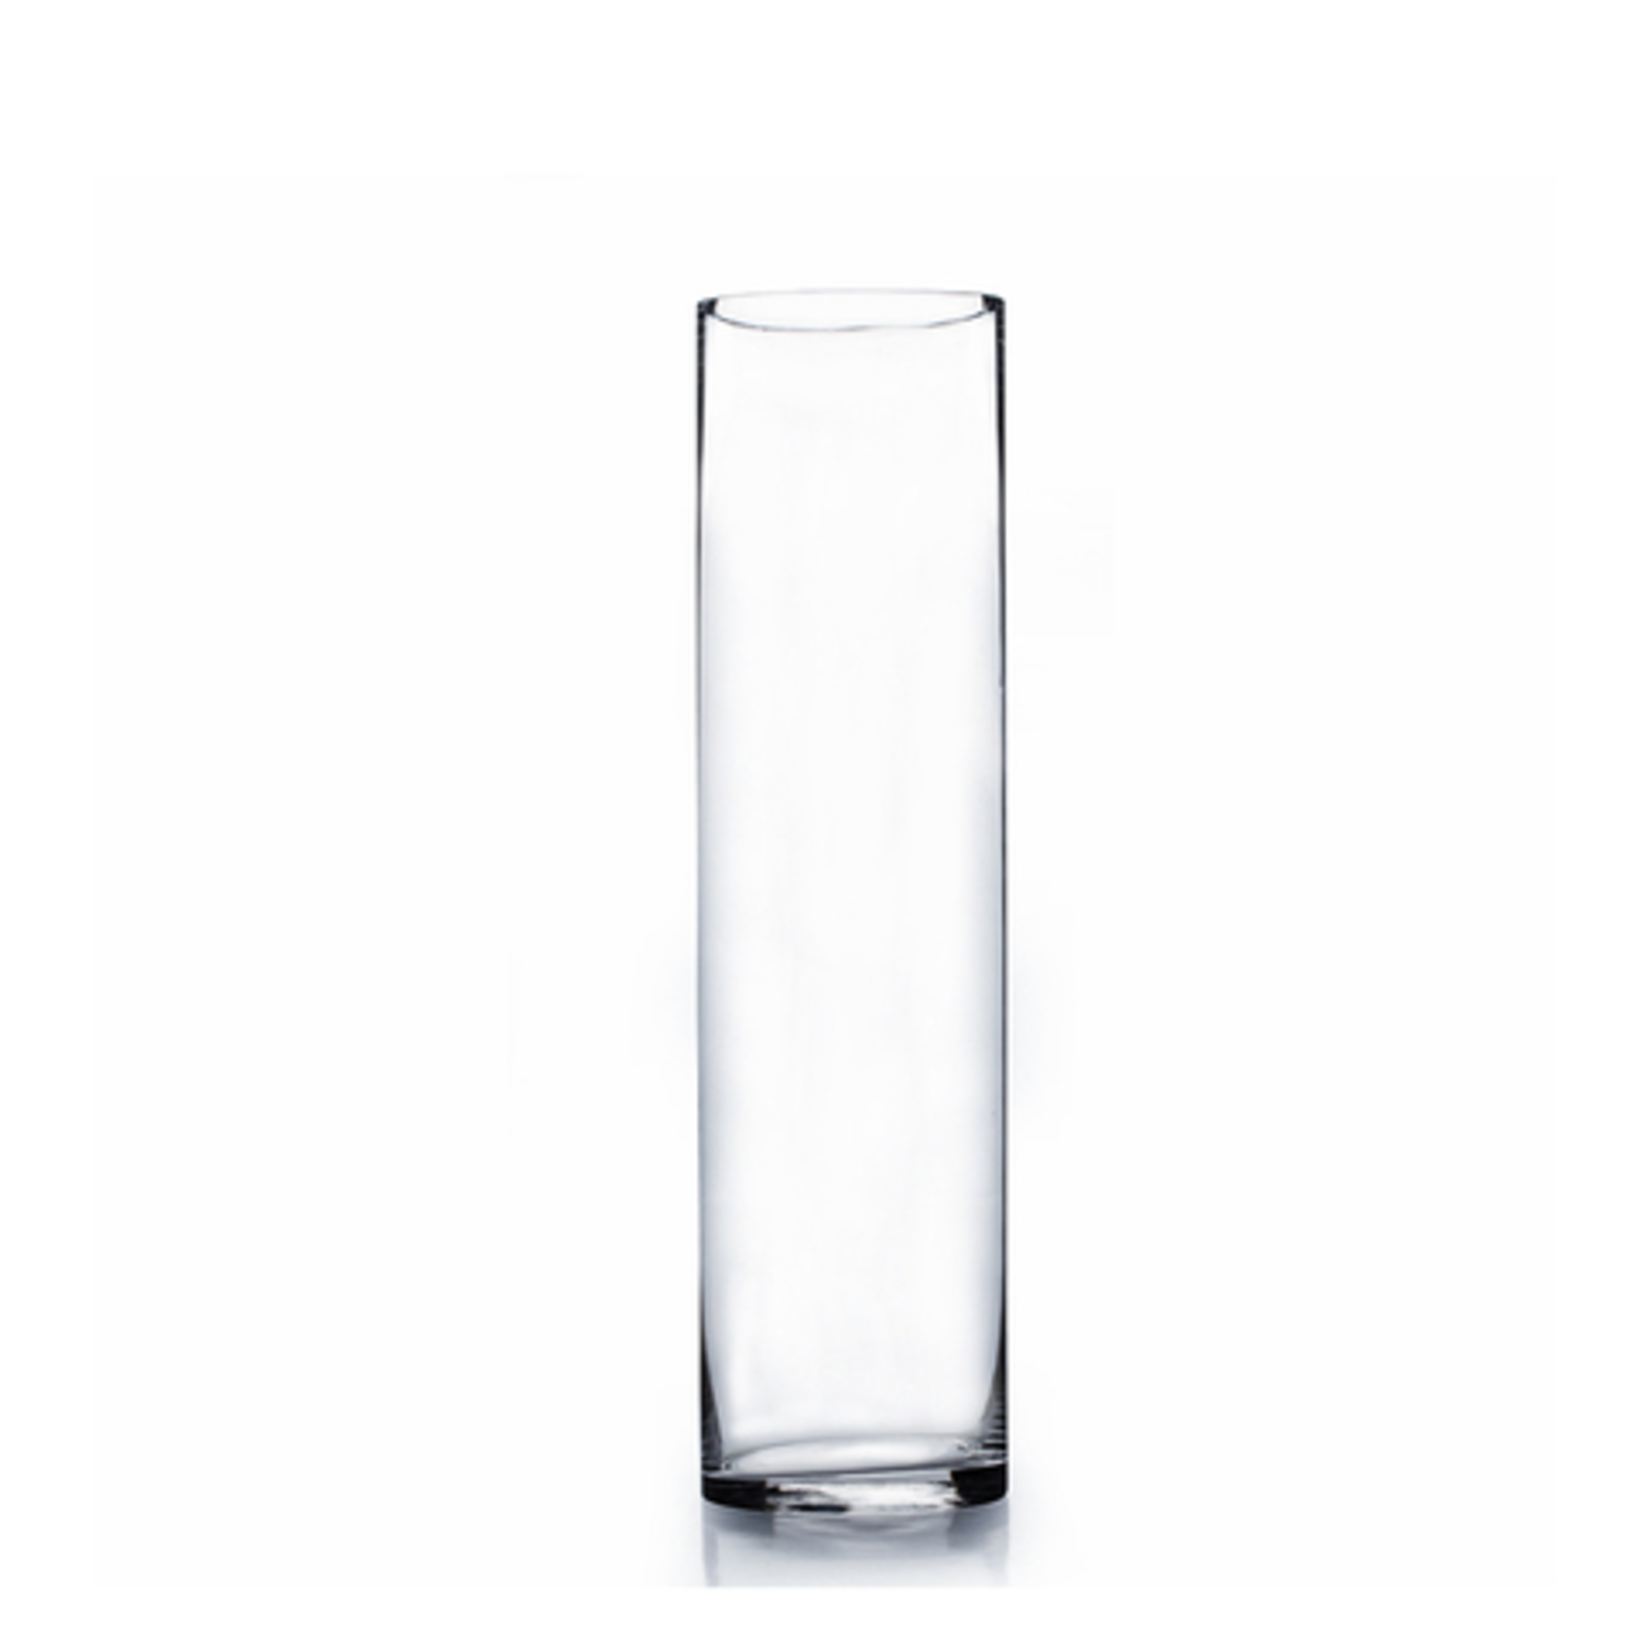 14"H X 4" CLEAR GLASS CYLINDER VASE